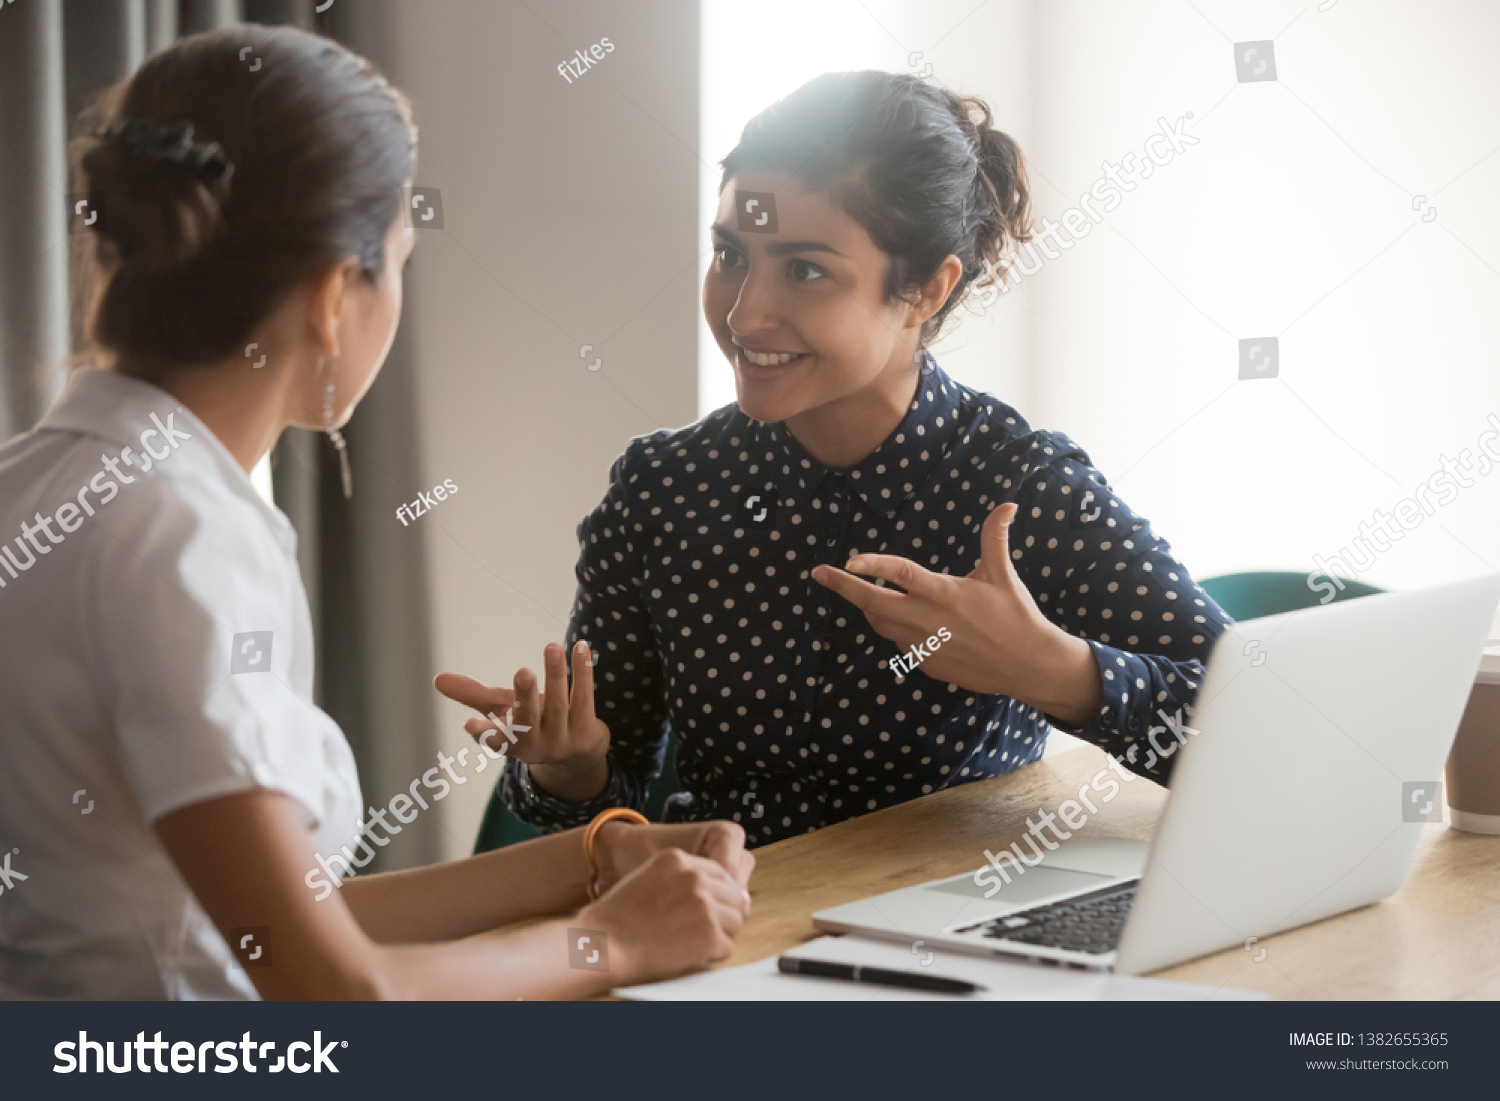 Excited multiethnic female employees discuss work issues sitting at office table, smiling diverse women workers or colleagues engaged in brainstorming talk chatting, explain ideas at workplace #1382655365